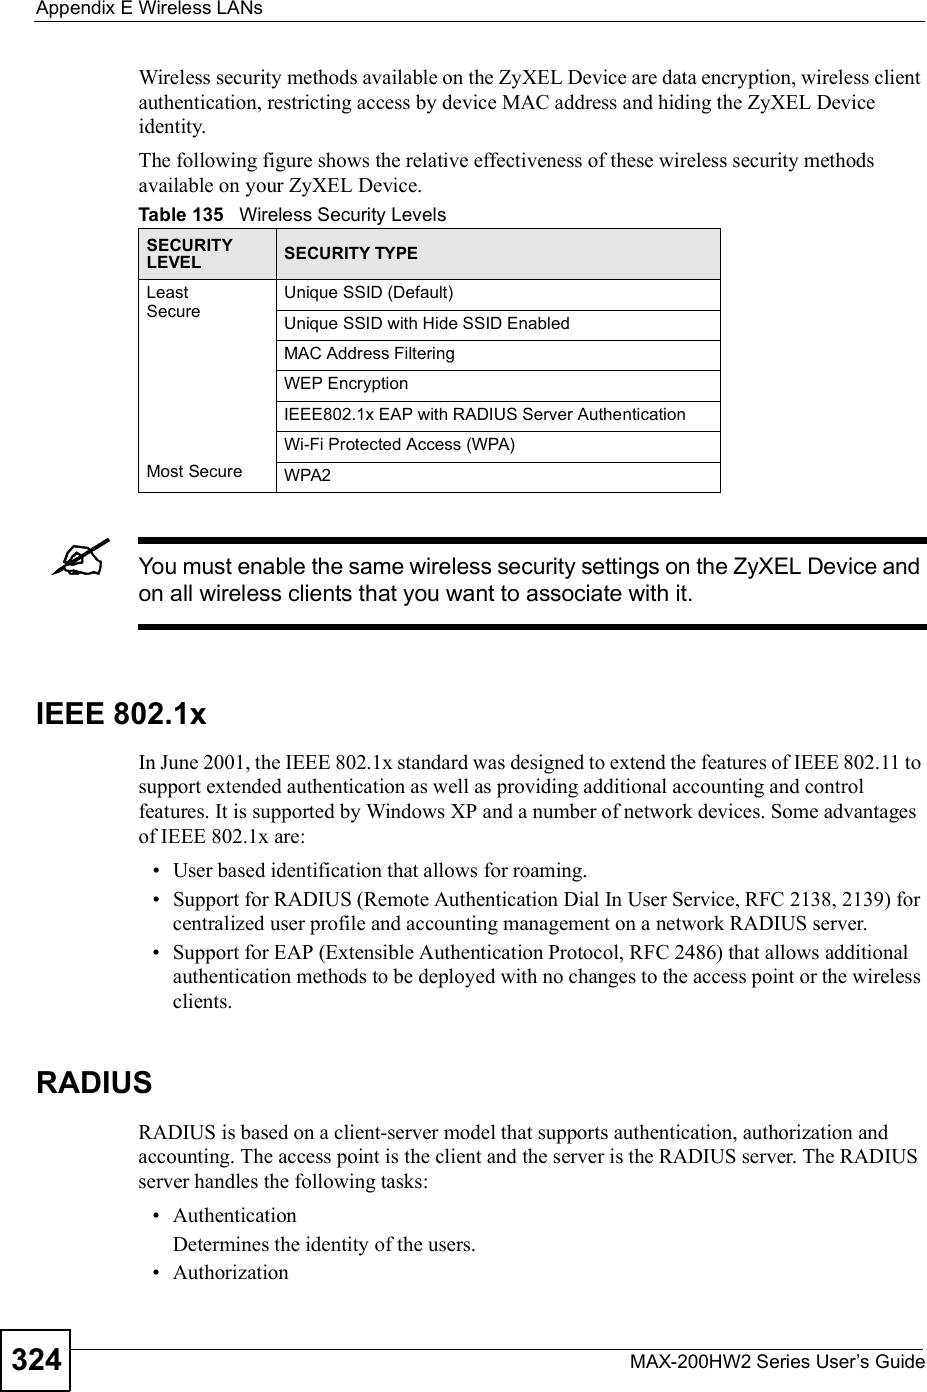 Appendix EWireless LANsMAX-200HW2 Series User s Guide324Wireless security methods available on the ZyXEL Device are data encryption, wireless client authentication, restricting access by device MAC address and hiding the ZyXEL Device identity.The following figure shows the relative effectiveness of these wireless security methods available on your ZyXEL Device.You must enable the same wireless security settings on the ZyXEL Device and on all wireless clients that you want to associate with it. IEEE 802.1xIn June 2001, the IEEE 802.1x standard was designed to extend the features of IEEE 802.11 to support extended authentication as well as providing additional accounting and control features. It is supported by Windows XP and a number of network devices. Some advantages of IEEE 802.1x are: User based identification that allows for roaming. Support for RADIUS (Remote Authentication Dial In User Service, RFC 2138, 2139) for centralized user profile and accounting management on a network RADIUS server.  Support for EAP (Extensible Authentication Protocol, RFC 2486) that allows additional authentication methods to be deployed with no changes to the access point or the wireless clients.RADIUSRADIUS is based on a client-server model that supports authentication, authorization and accounting. The access point is the client and the server is the RADIUS server. The RADIUS server handles the following tasks: Authentication Determines the identity of the users. AuthorizationTable 135   Wireless Security LevelsSECURITY LEVEL SECURITY TYPELeast       Secure                                                                                  Most SecureUnique SSID (Default)Unique SSID with Hide SSID EnabledMAC Address FilteringWEP EncryptionIEEE802.1x EAP with RADIUS Server AuthenticationWi-Fi Protected Access (WPA)WPA2